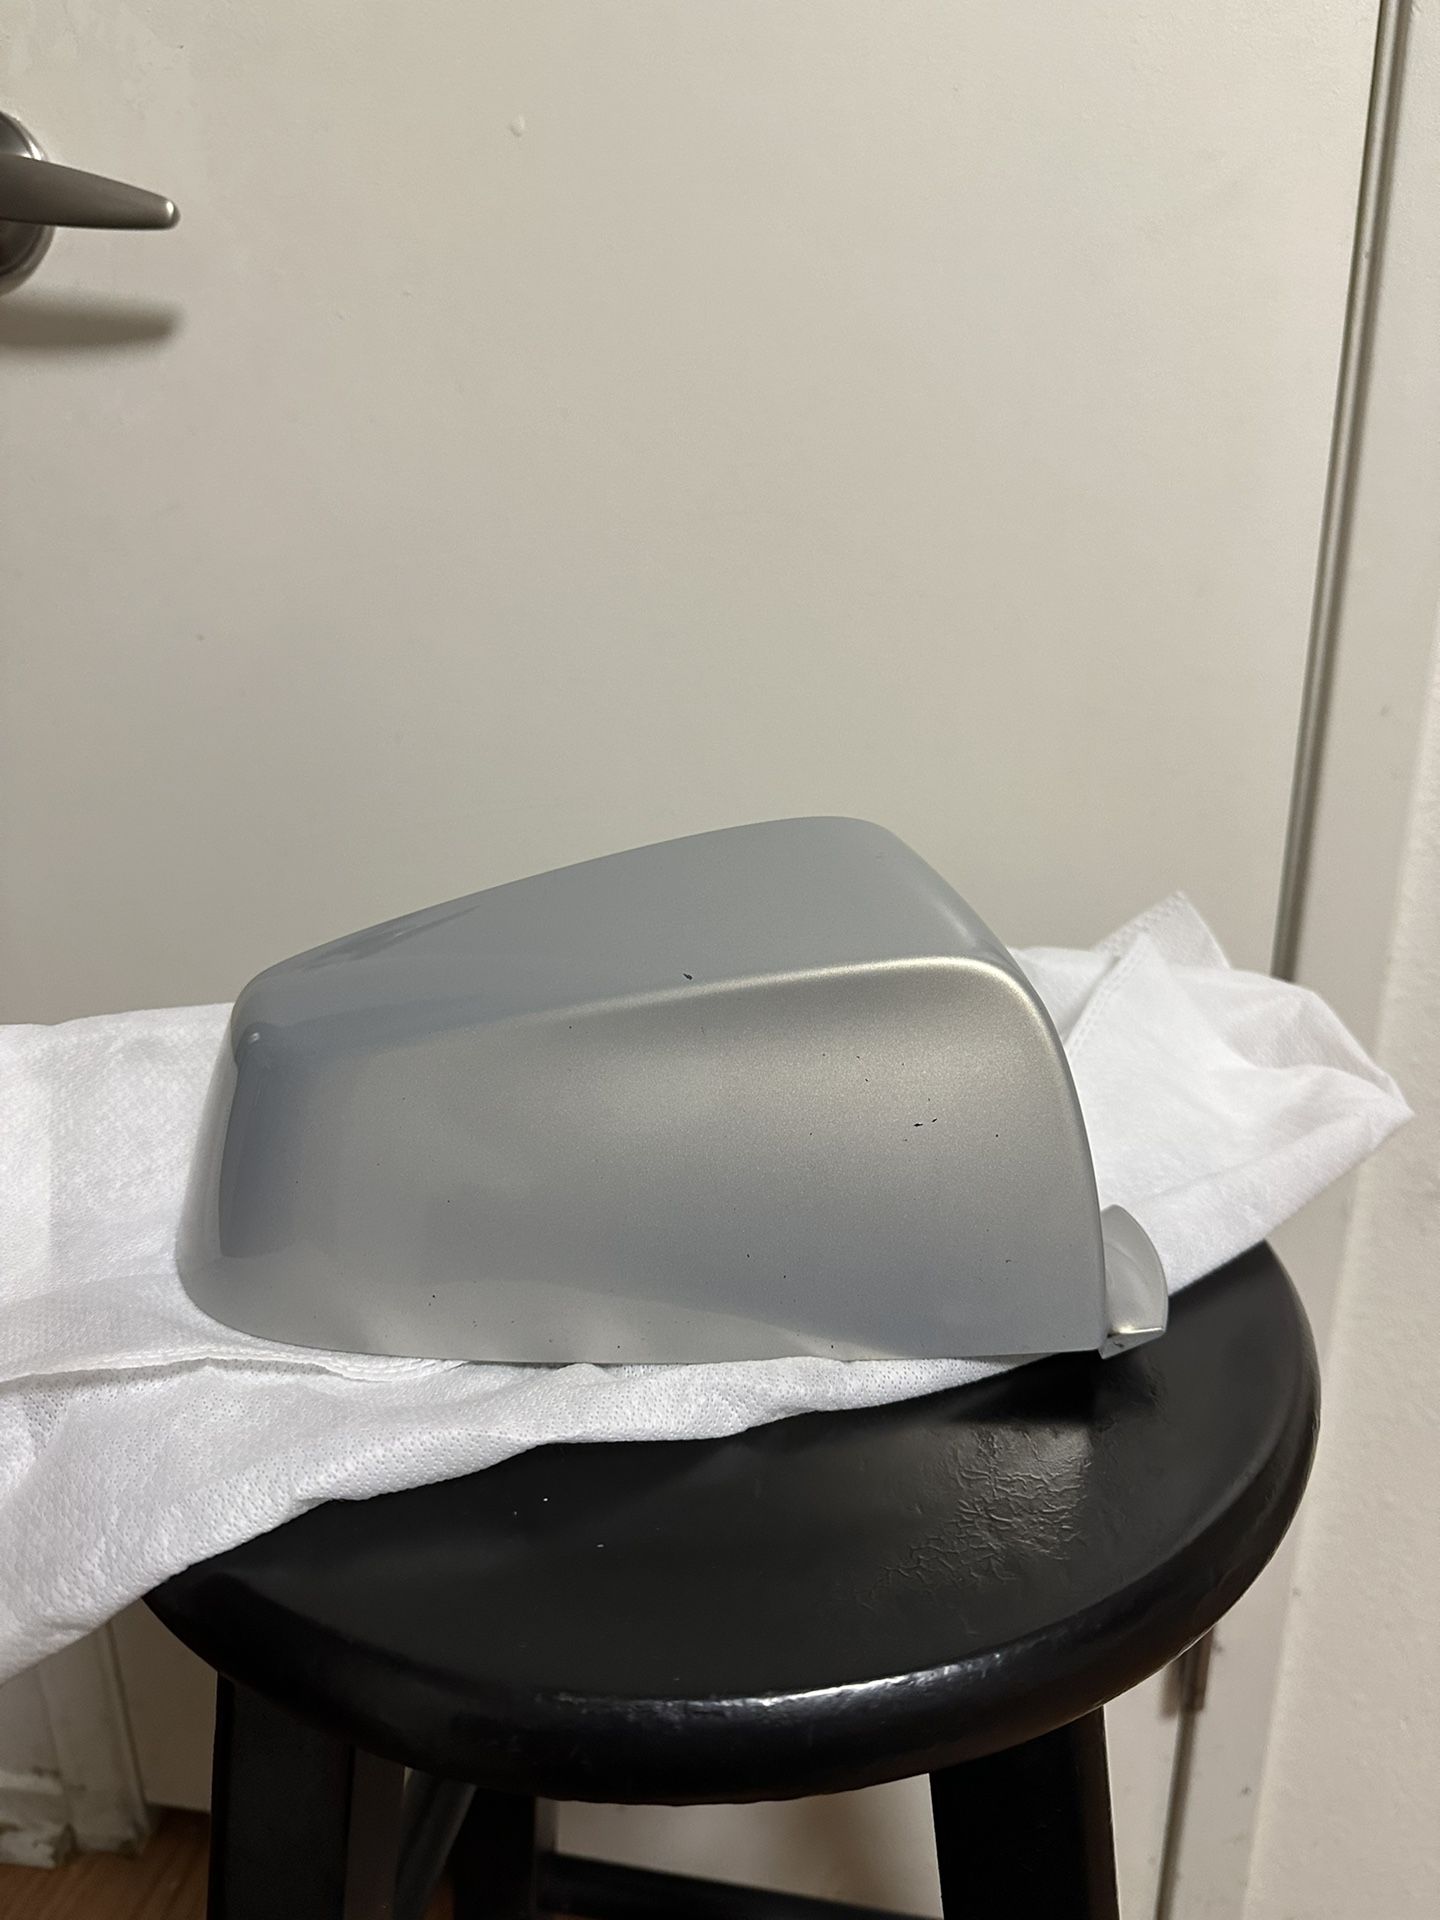 Oem 640i Gran Coupe Side Mirror Caps 